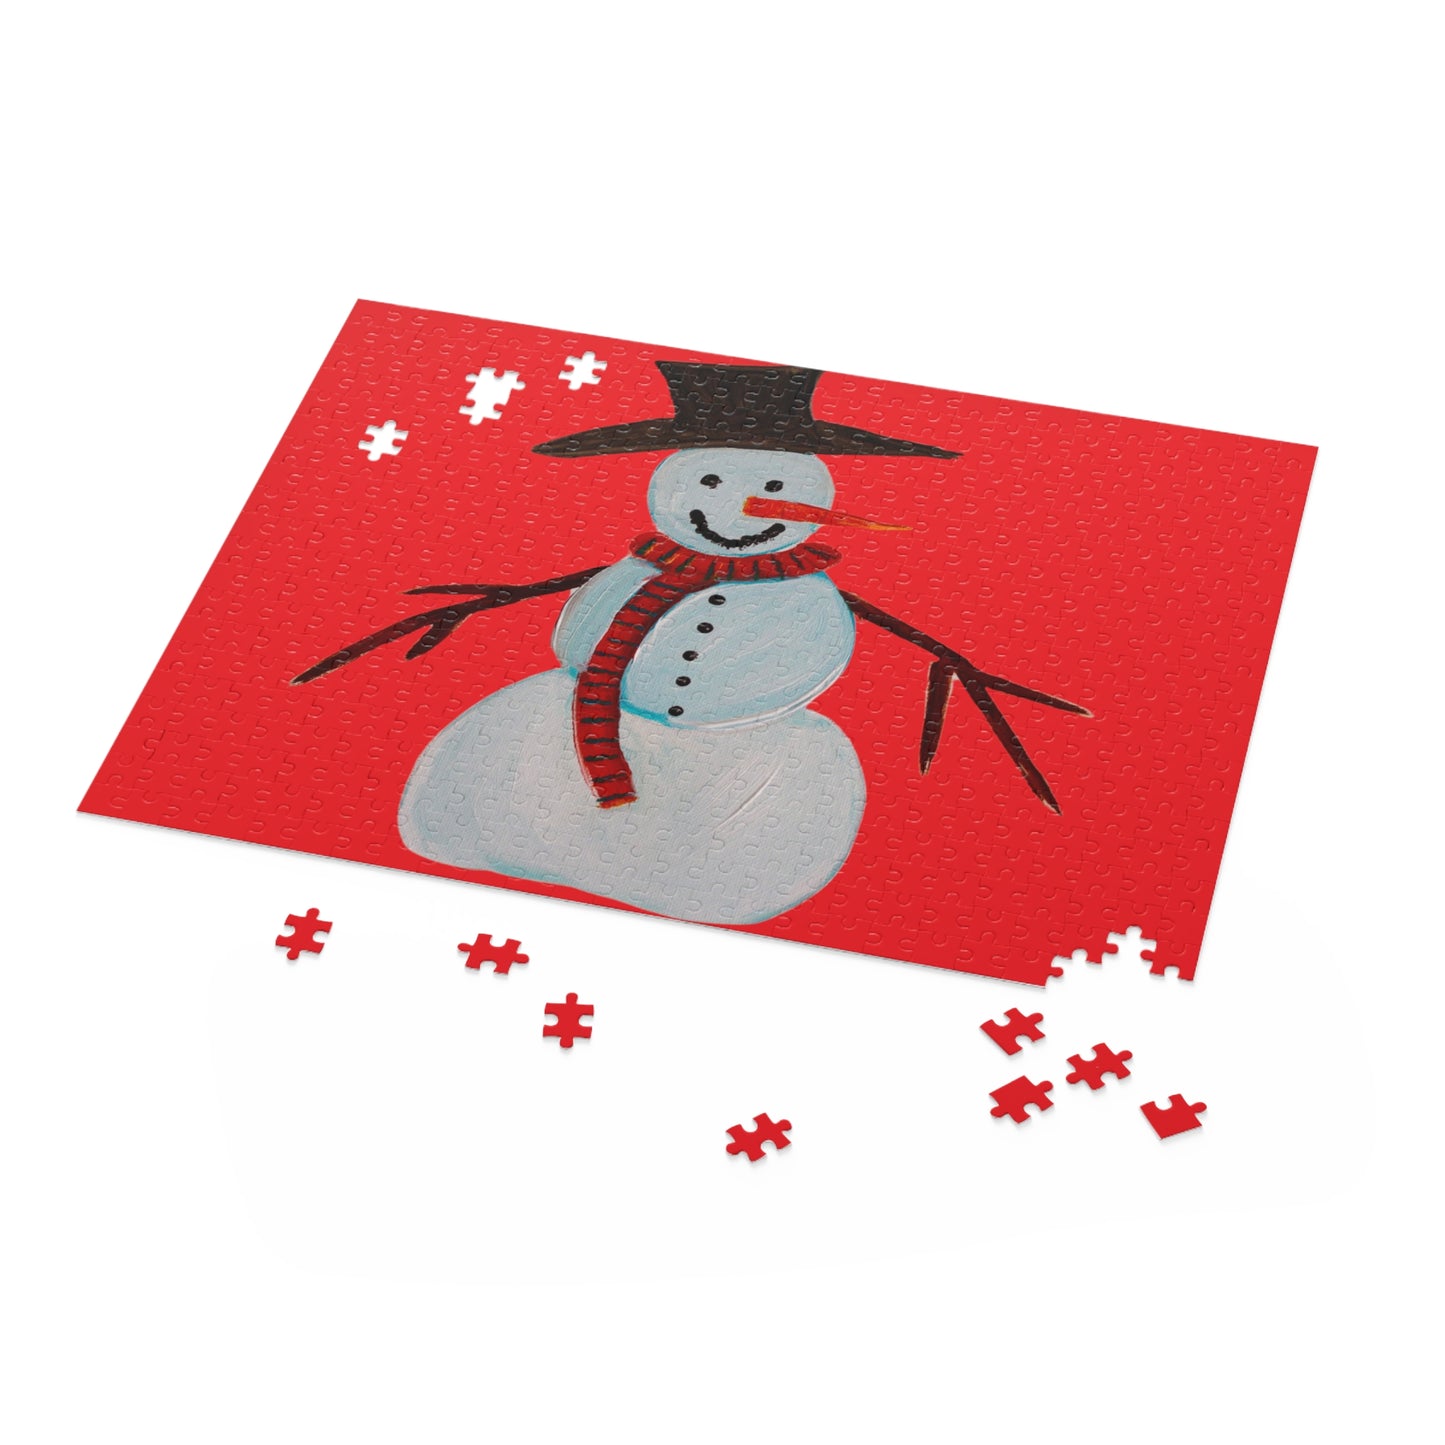 500 piece Holiday Jigsaw Puzzle - Snowman Puzzle - Jigsaw - Jigsaw puzzle Game